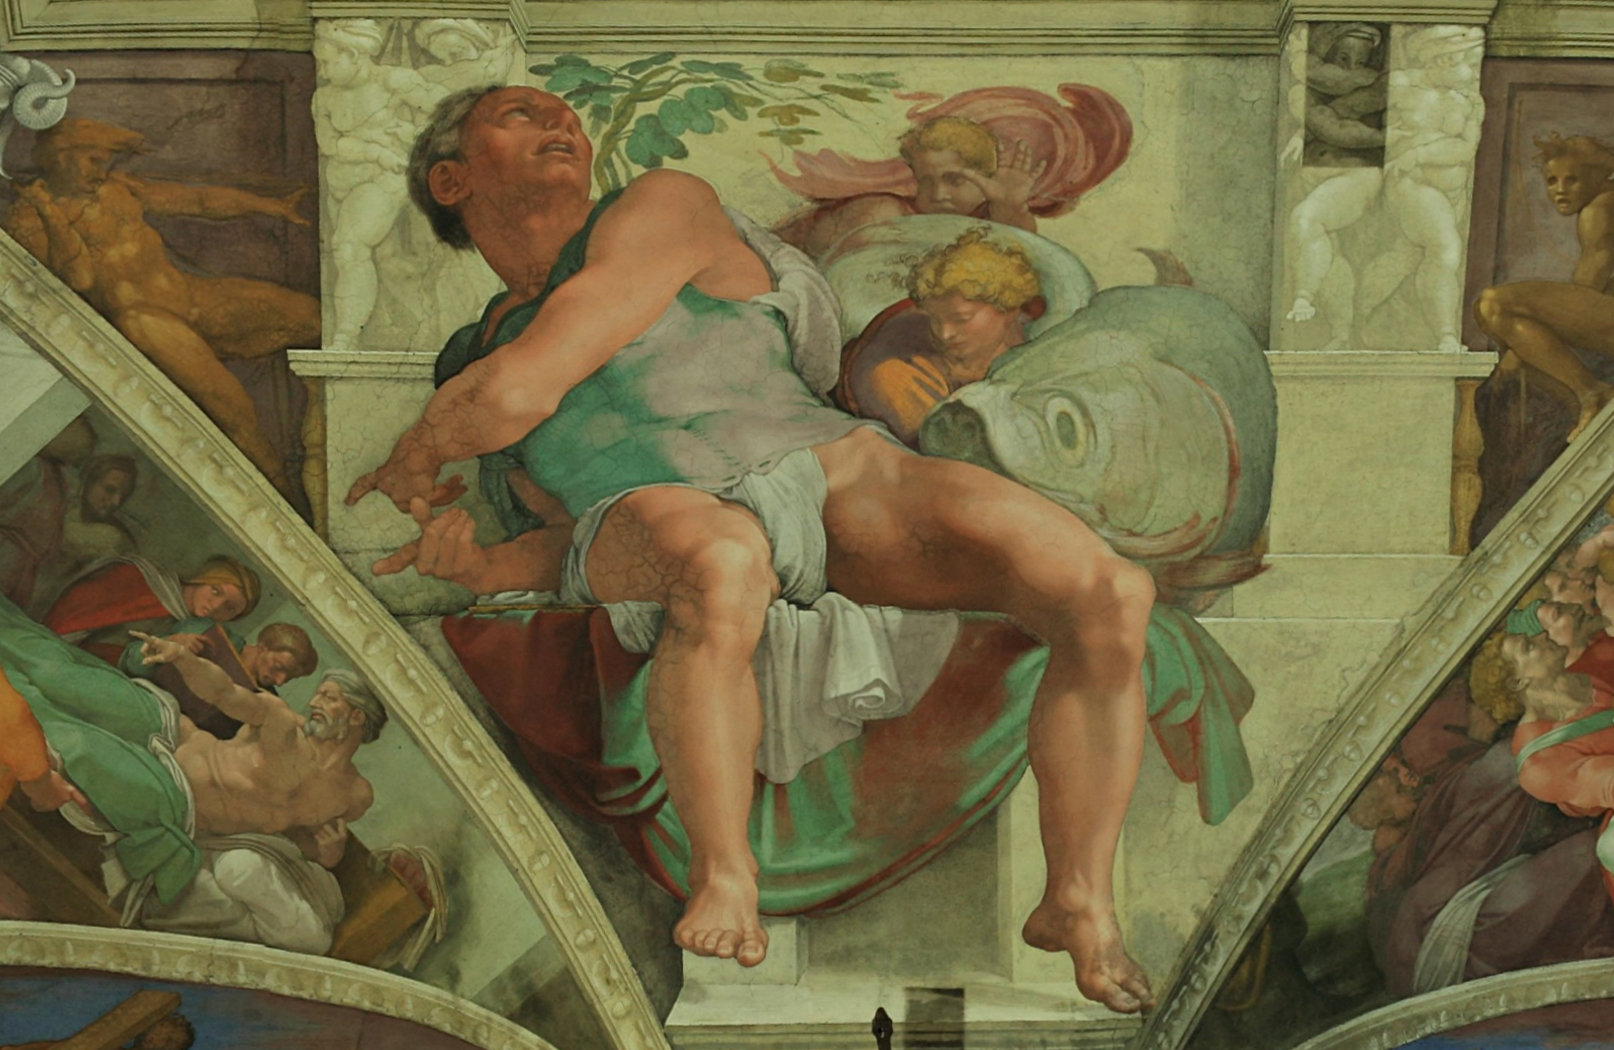 Rome Day Tours of the Vatican show off amazing details such as this highlight by Michelangelo of Jonah in the Sistine Chapel Ceiling